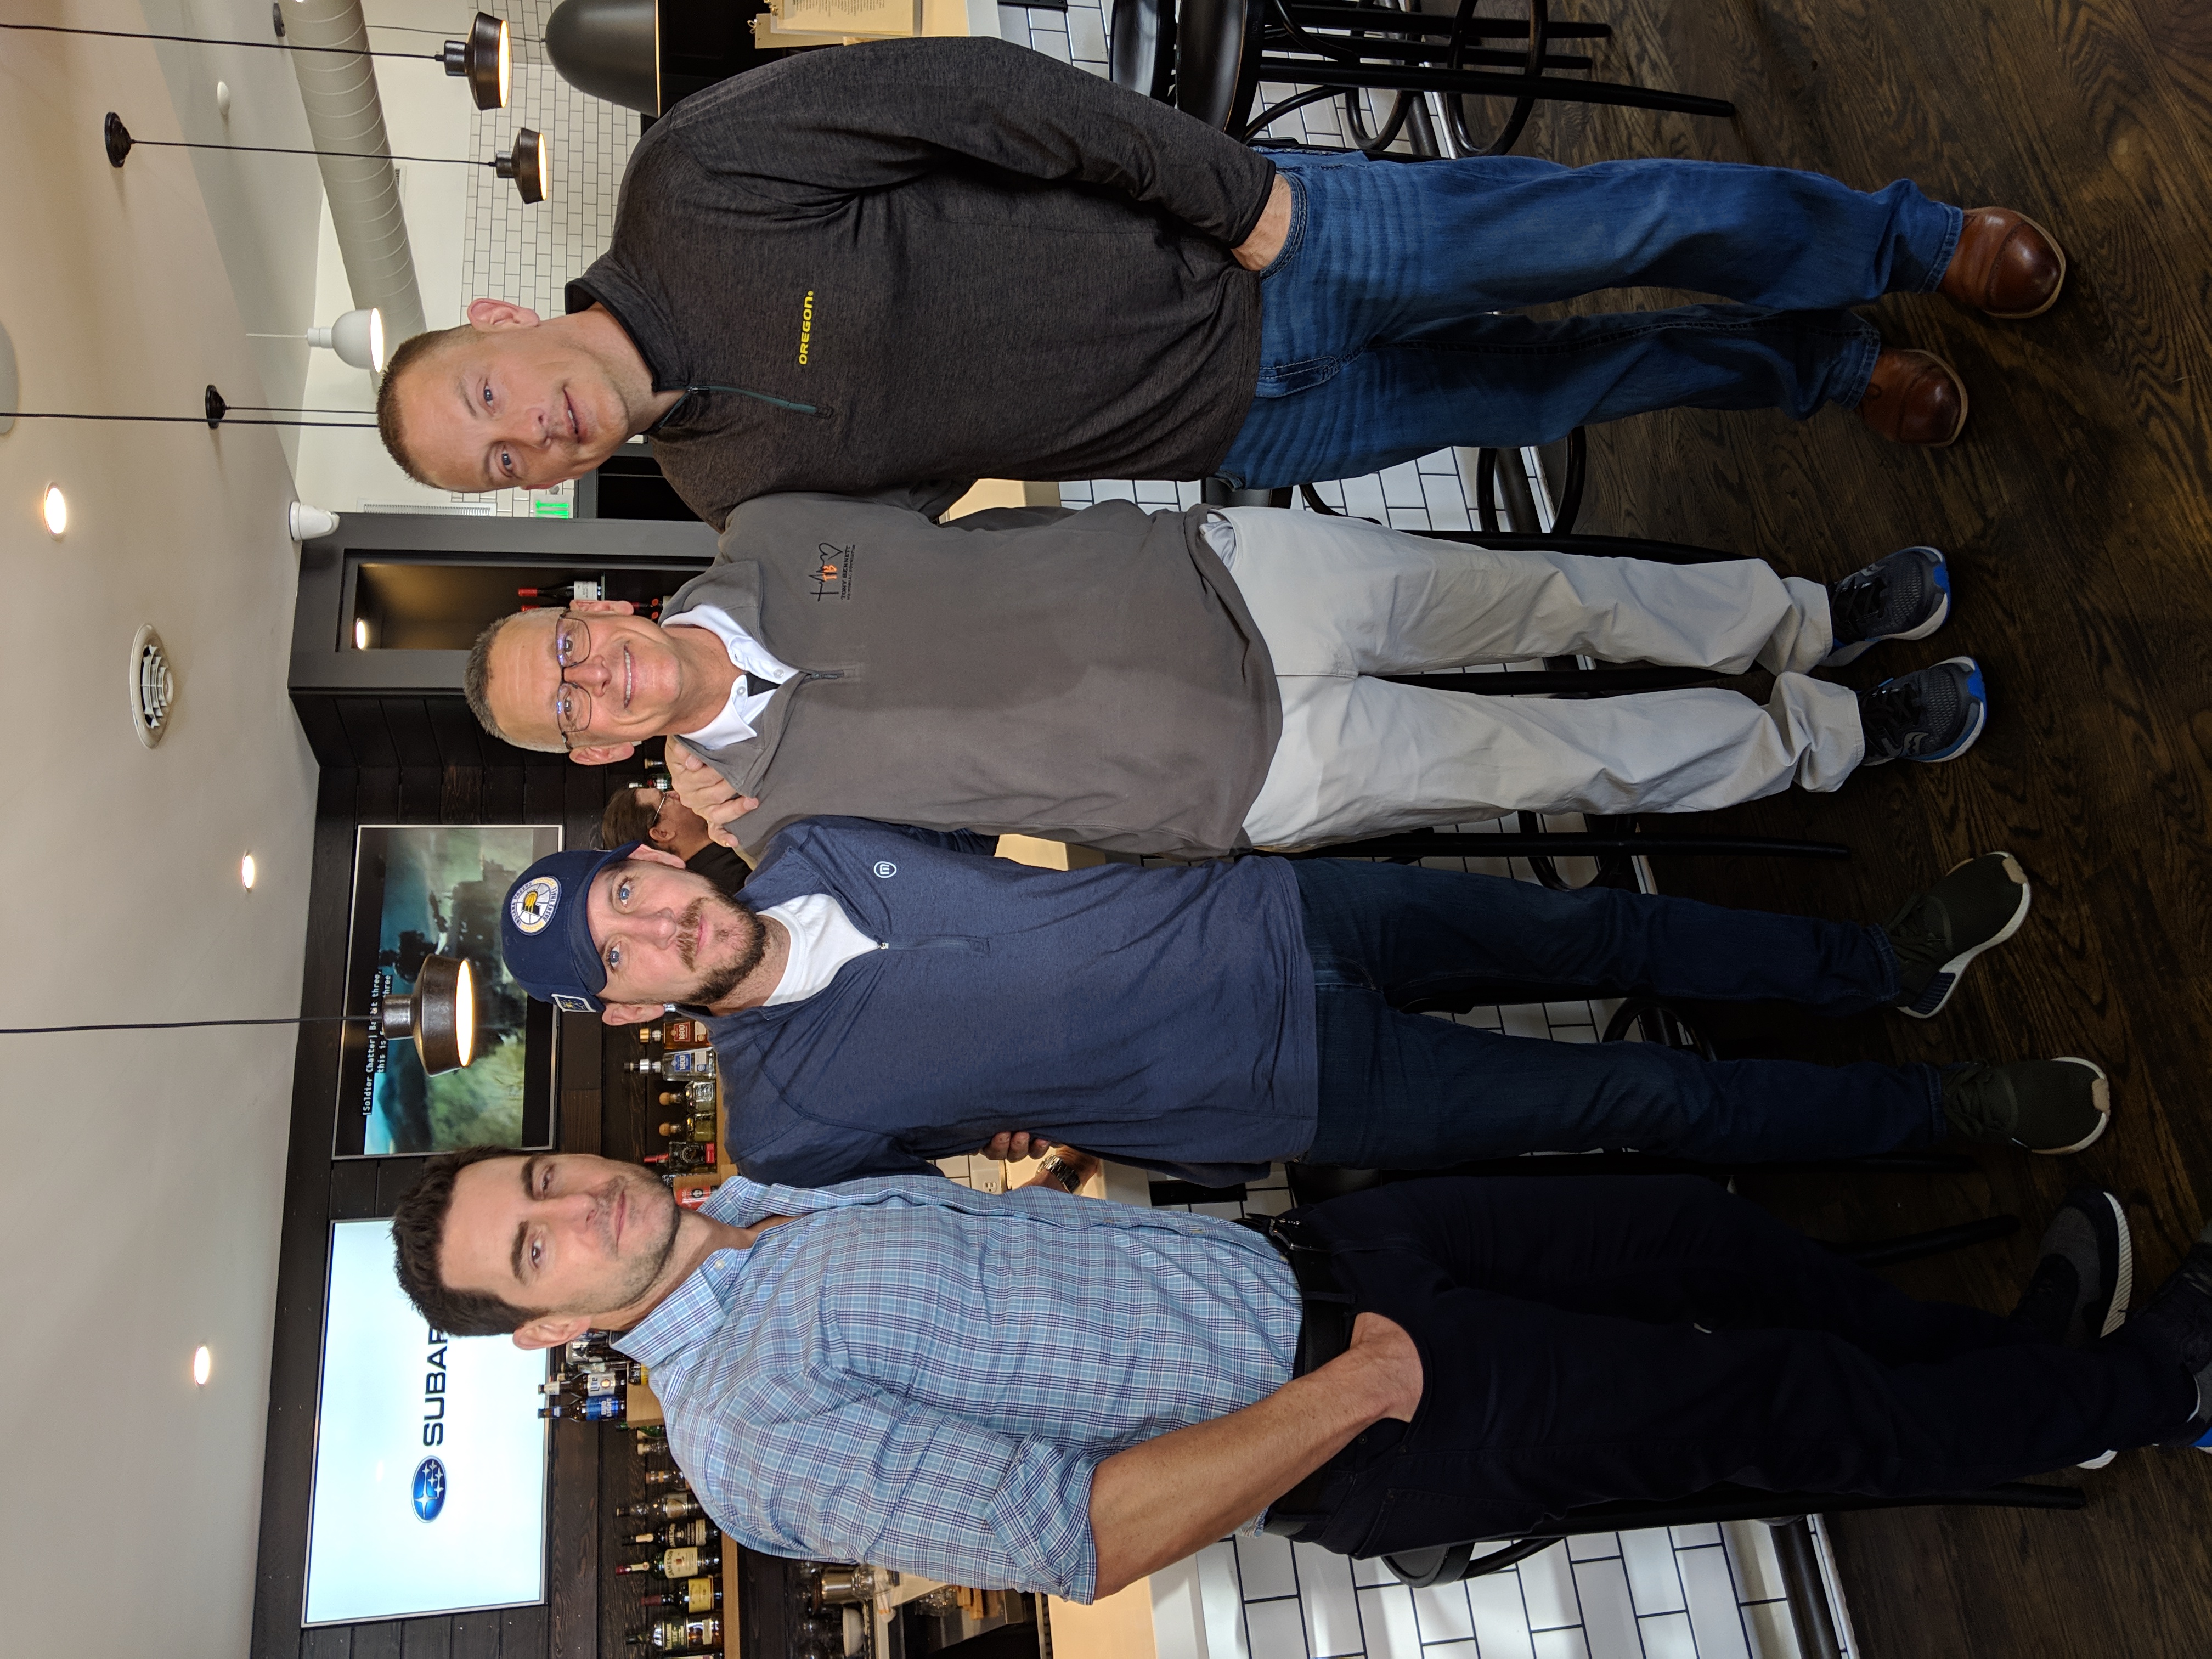 Four men posing for a picture at March Madness event.